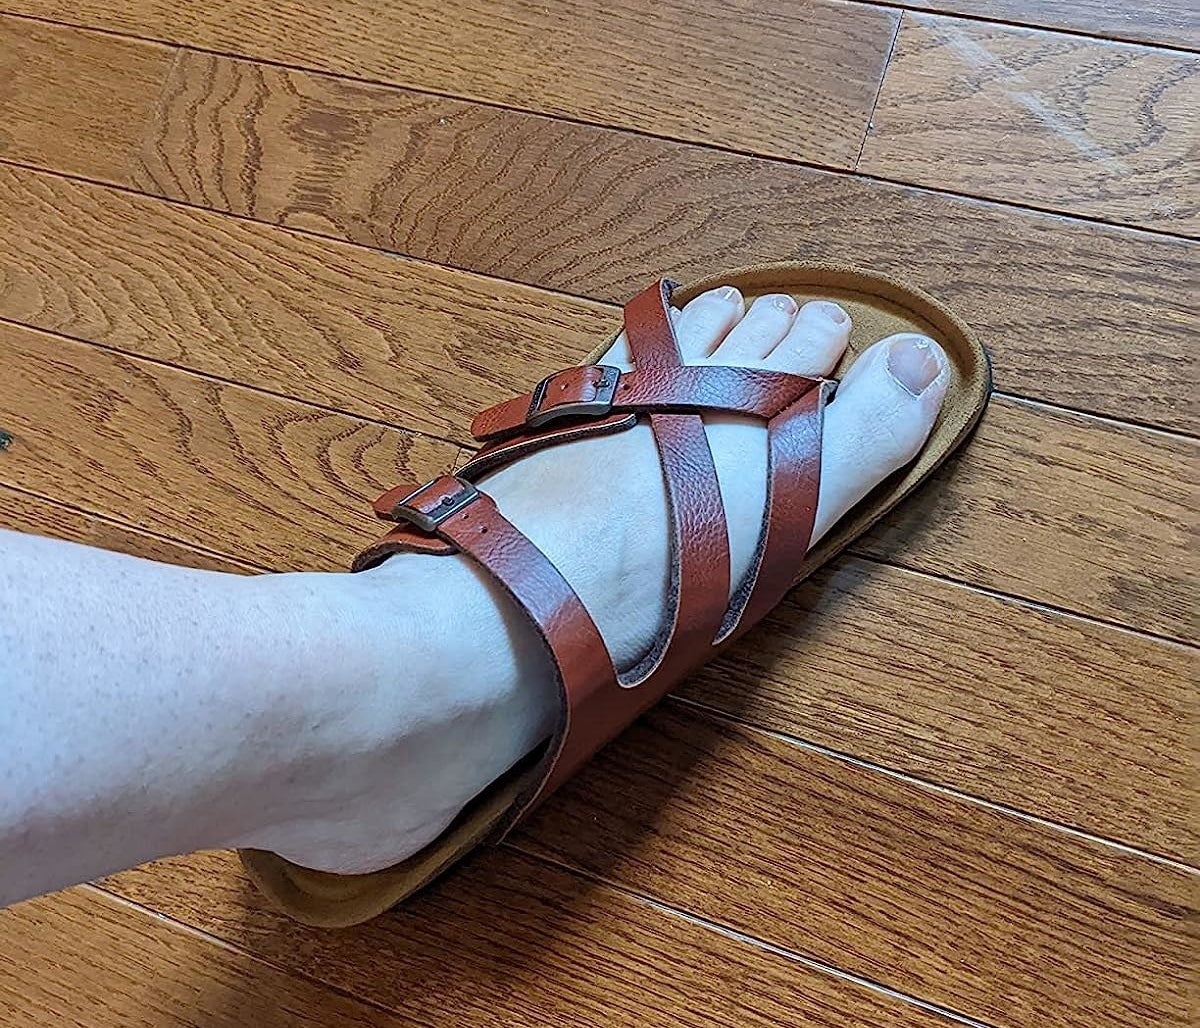 A reviewer wearing brown sandals